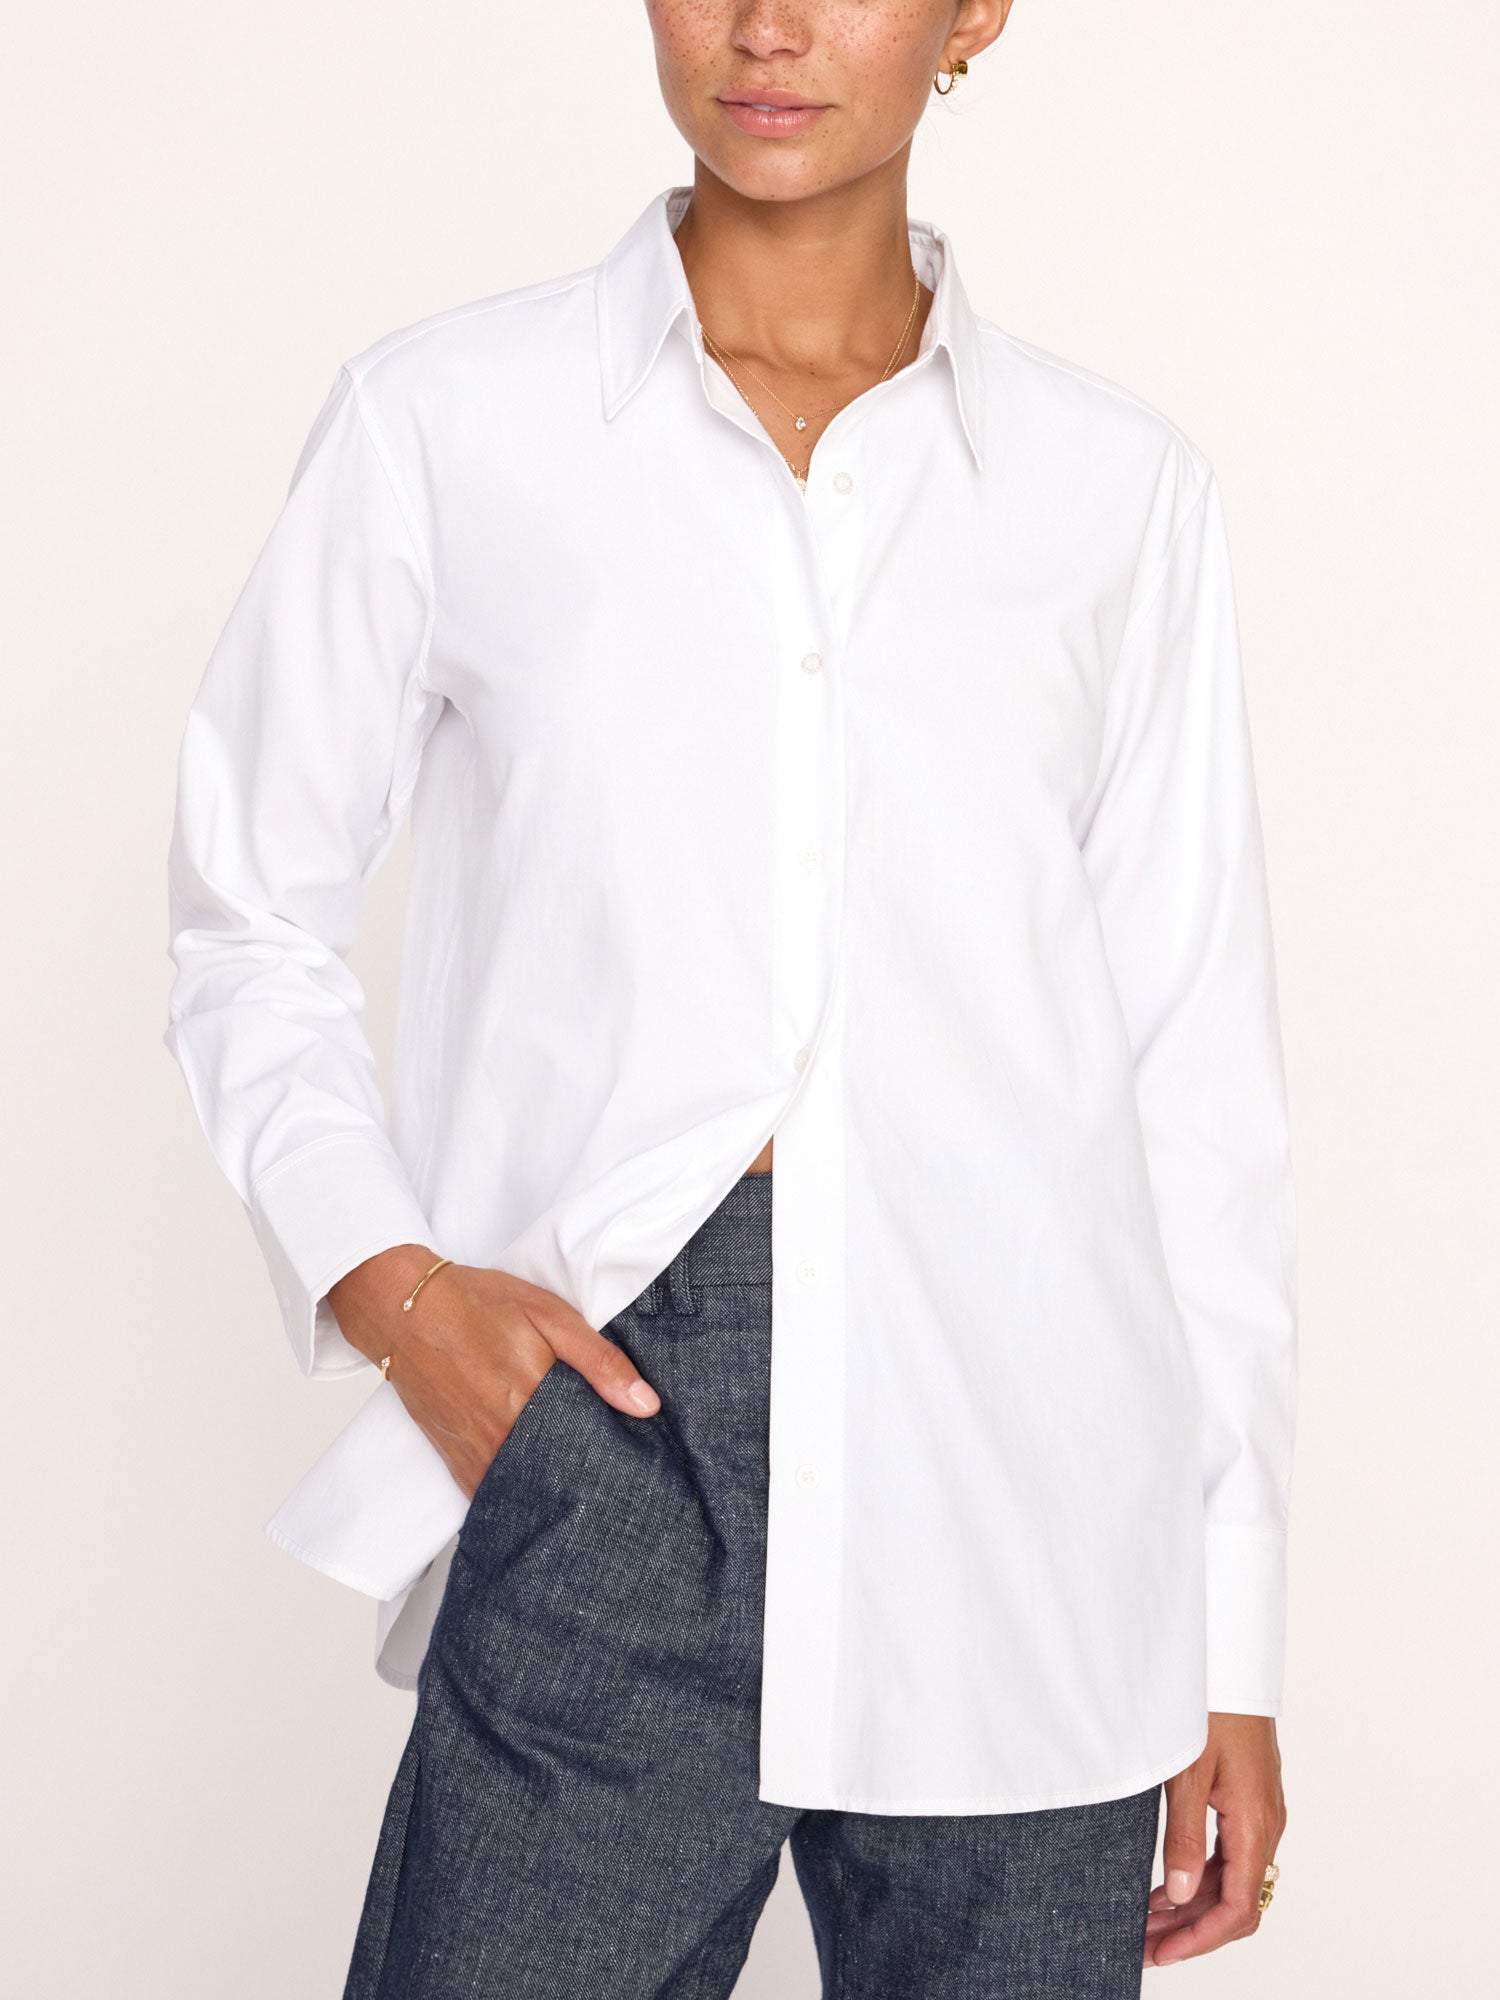 Lark button up shirt white front view 